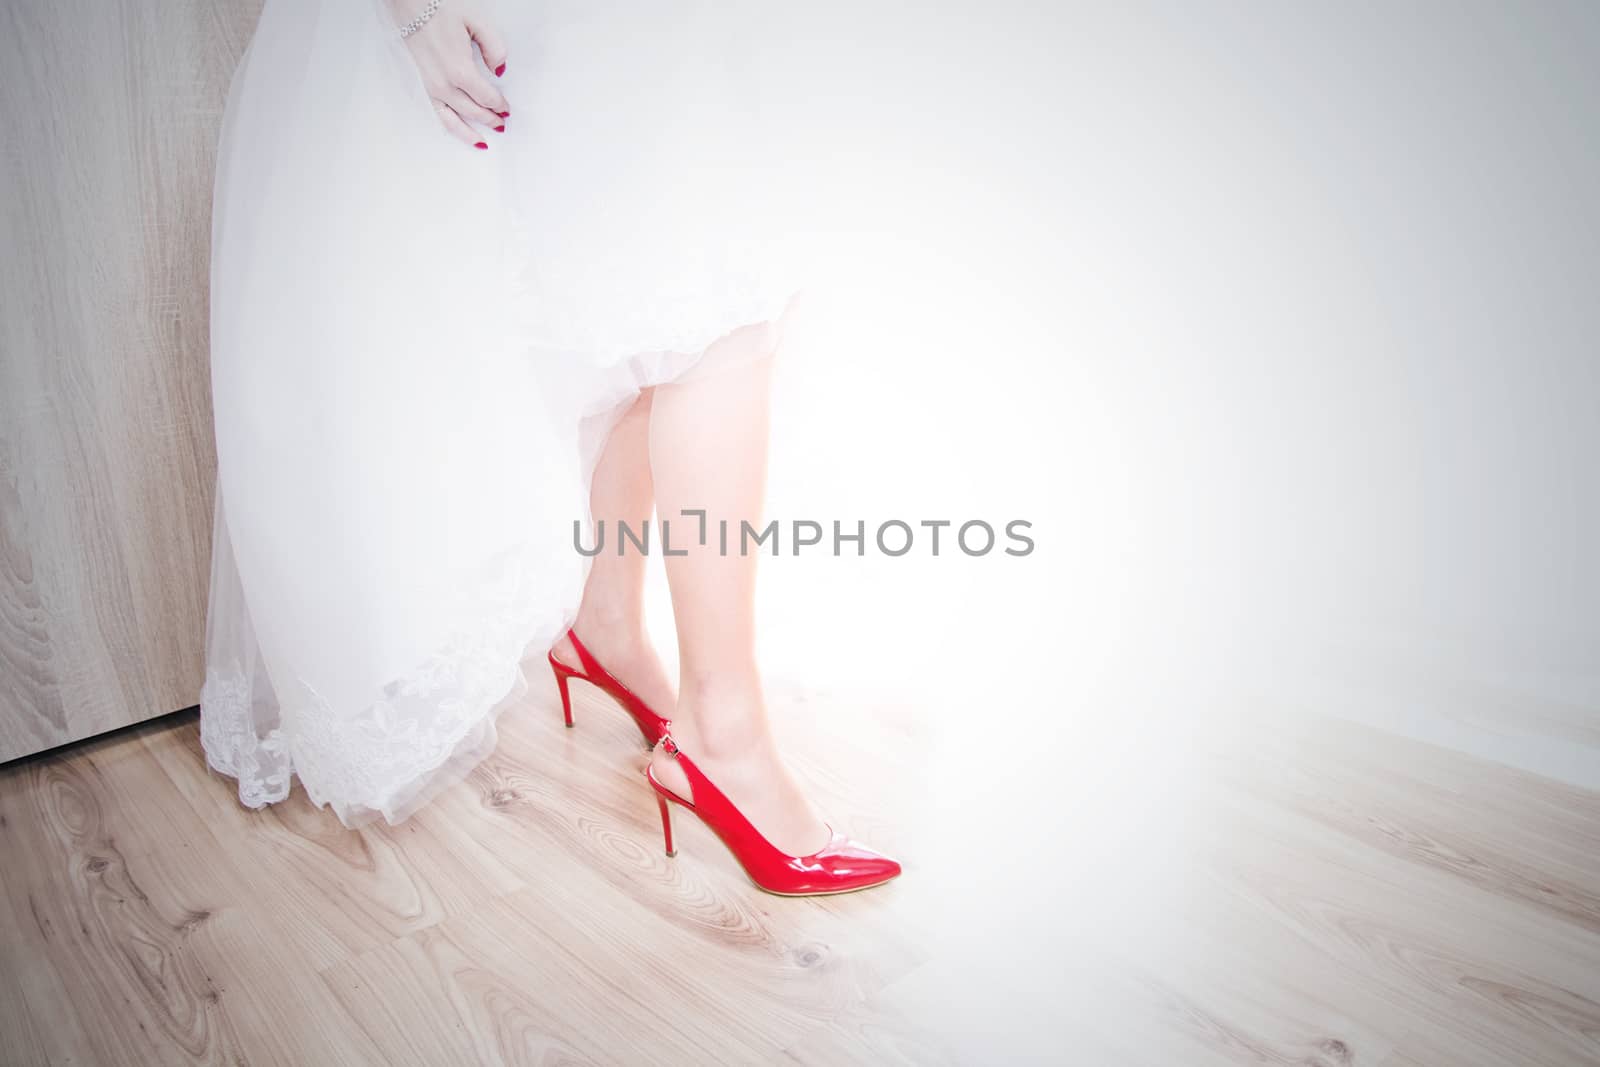 Bride in wedding dress and bridal shoes. Marriage and wedding concept image.